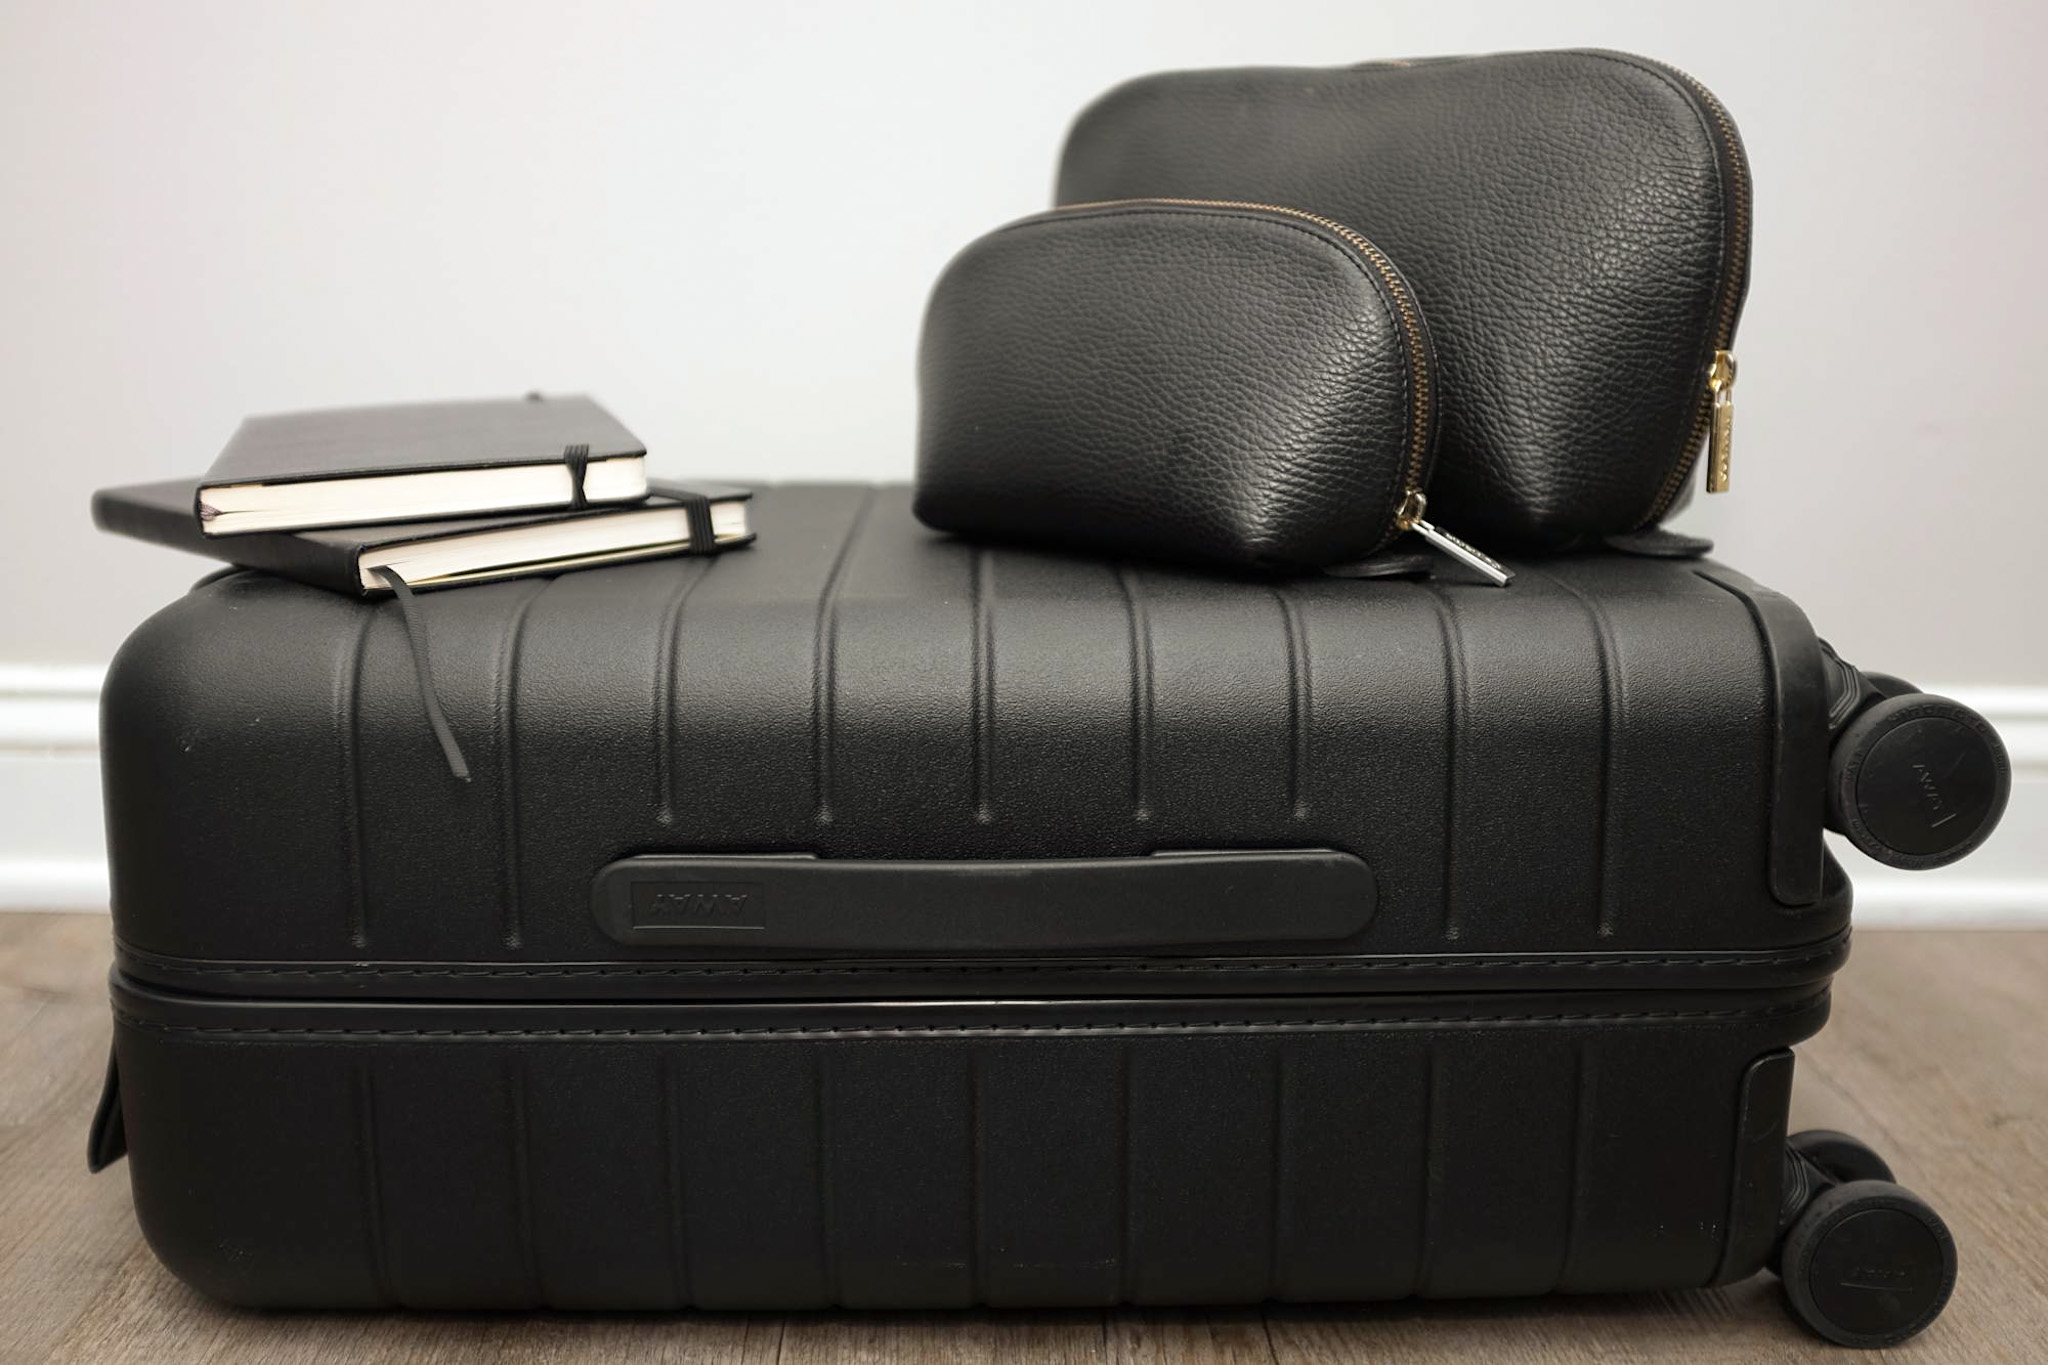 The Leather Travel Set from Cuyana sits on top of a black Away suitcase, and there are two journals next to the travel set